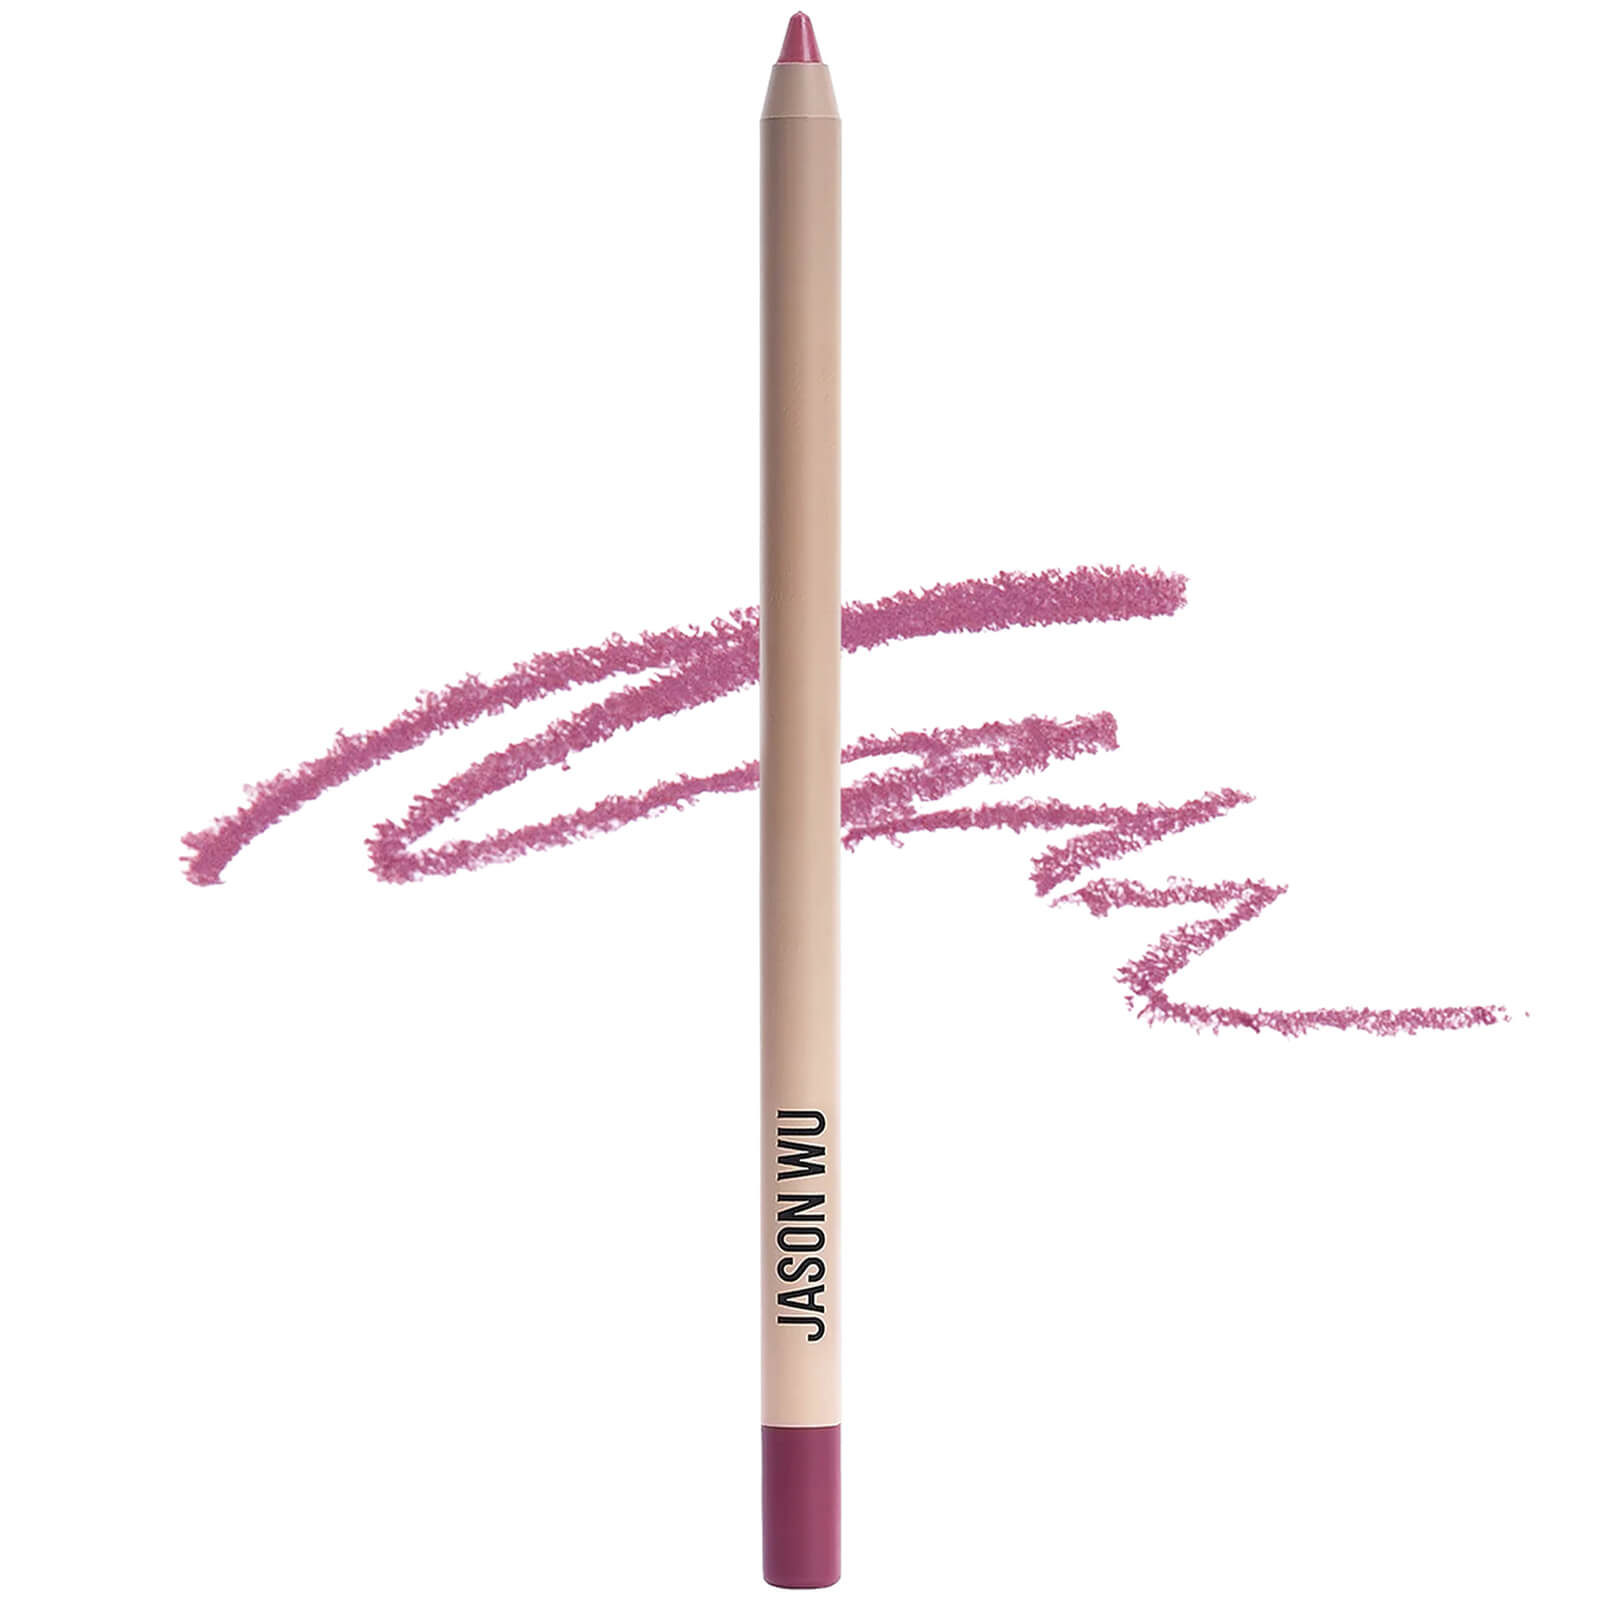 Jason Wu Beauty Stay In Line Lip Liner 1.8g (various Shades) - Mauve Pink